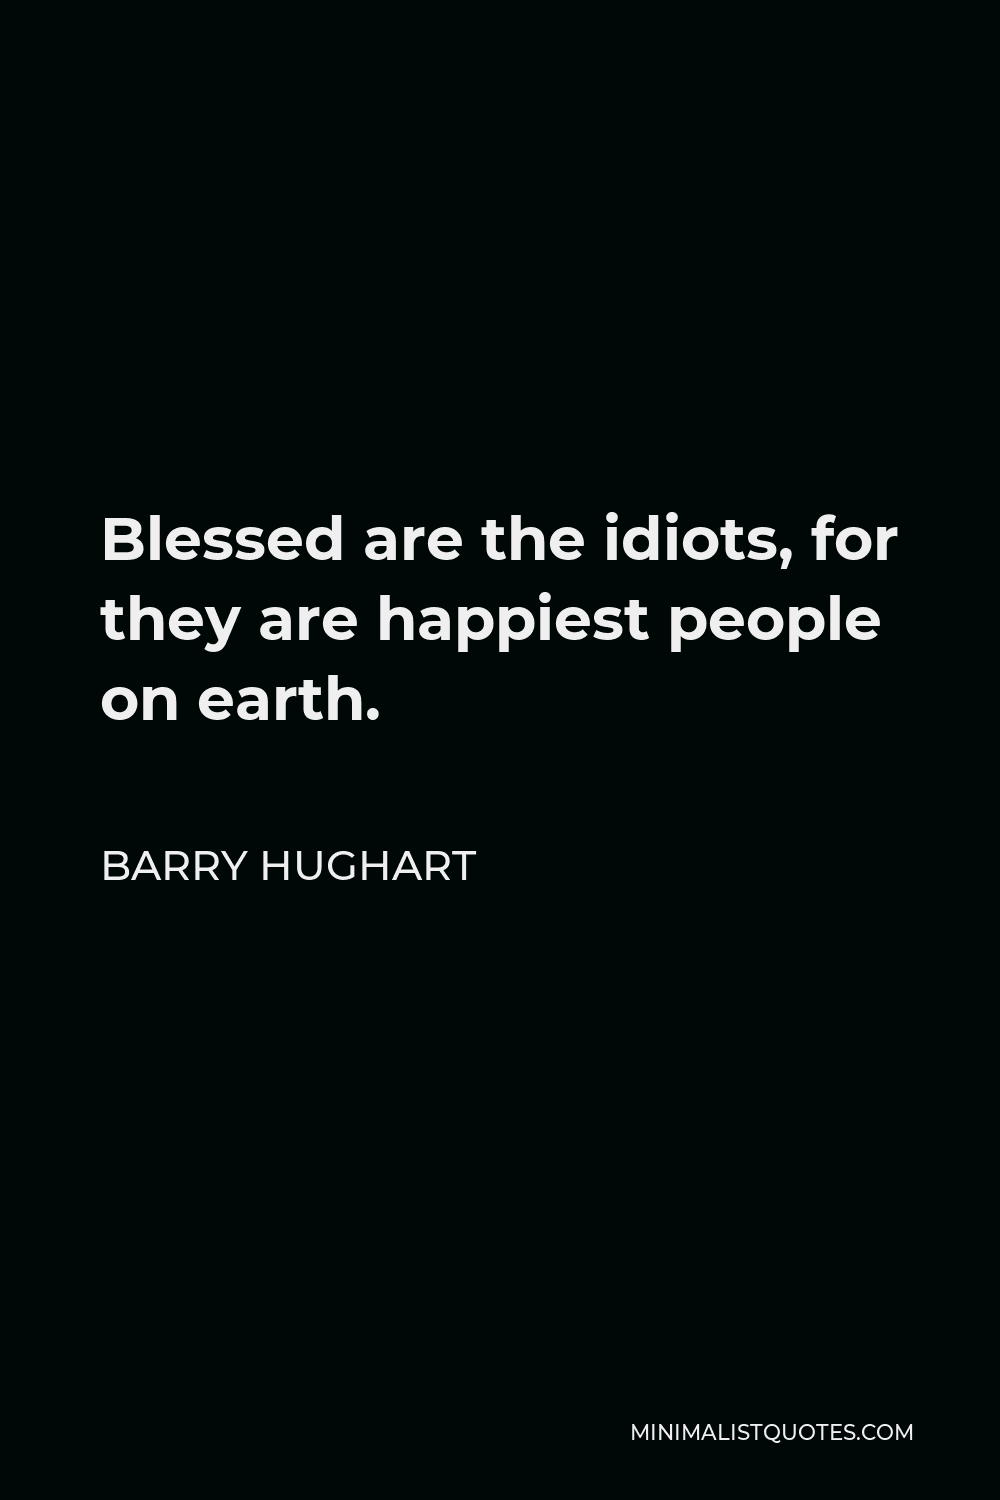 Barry Hughart Quote - Blessed are the idiots, for they are happiest people on earth.